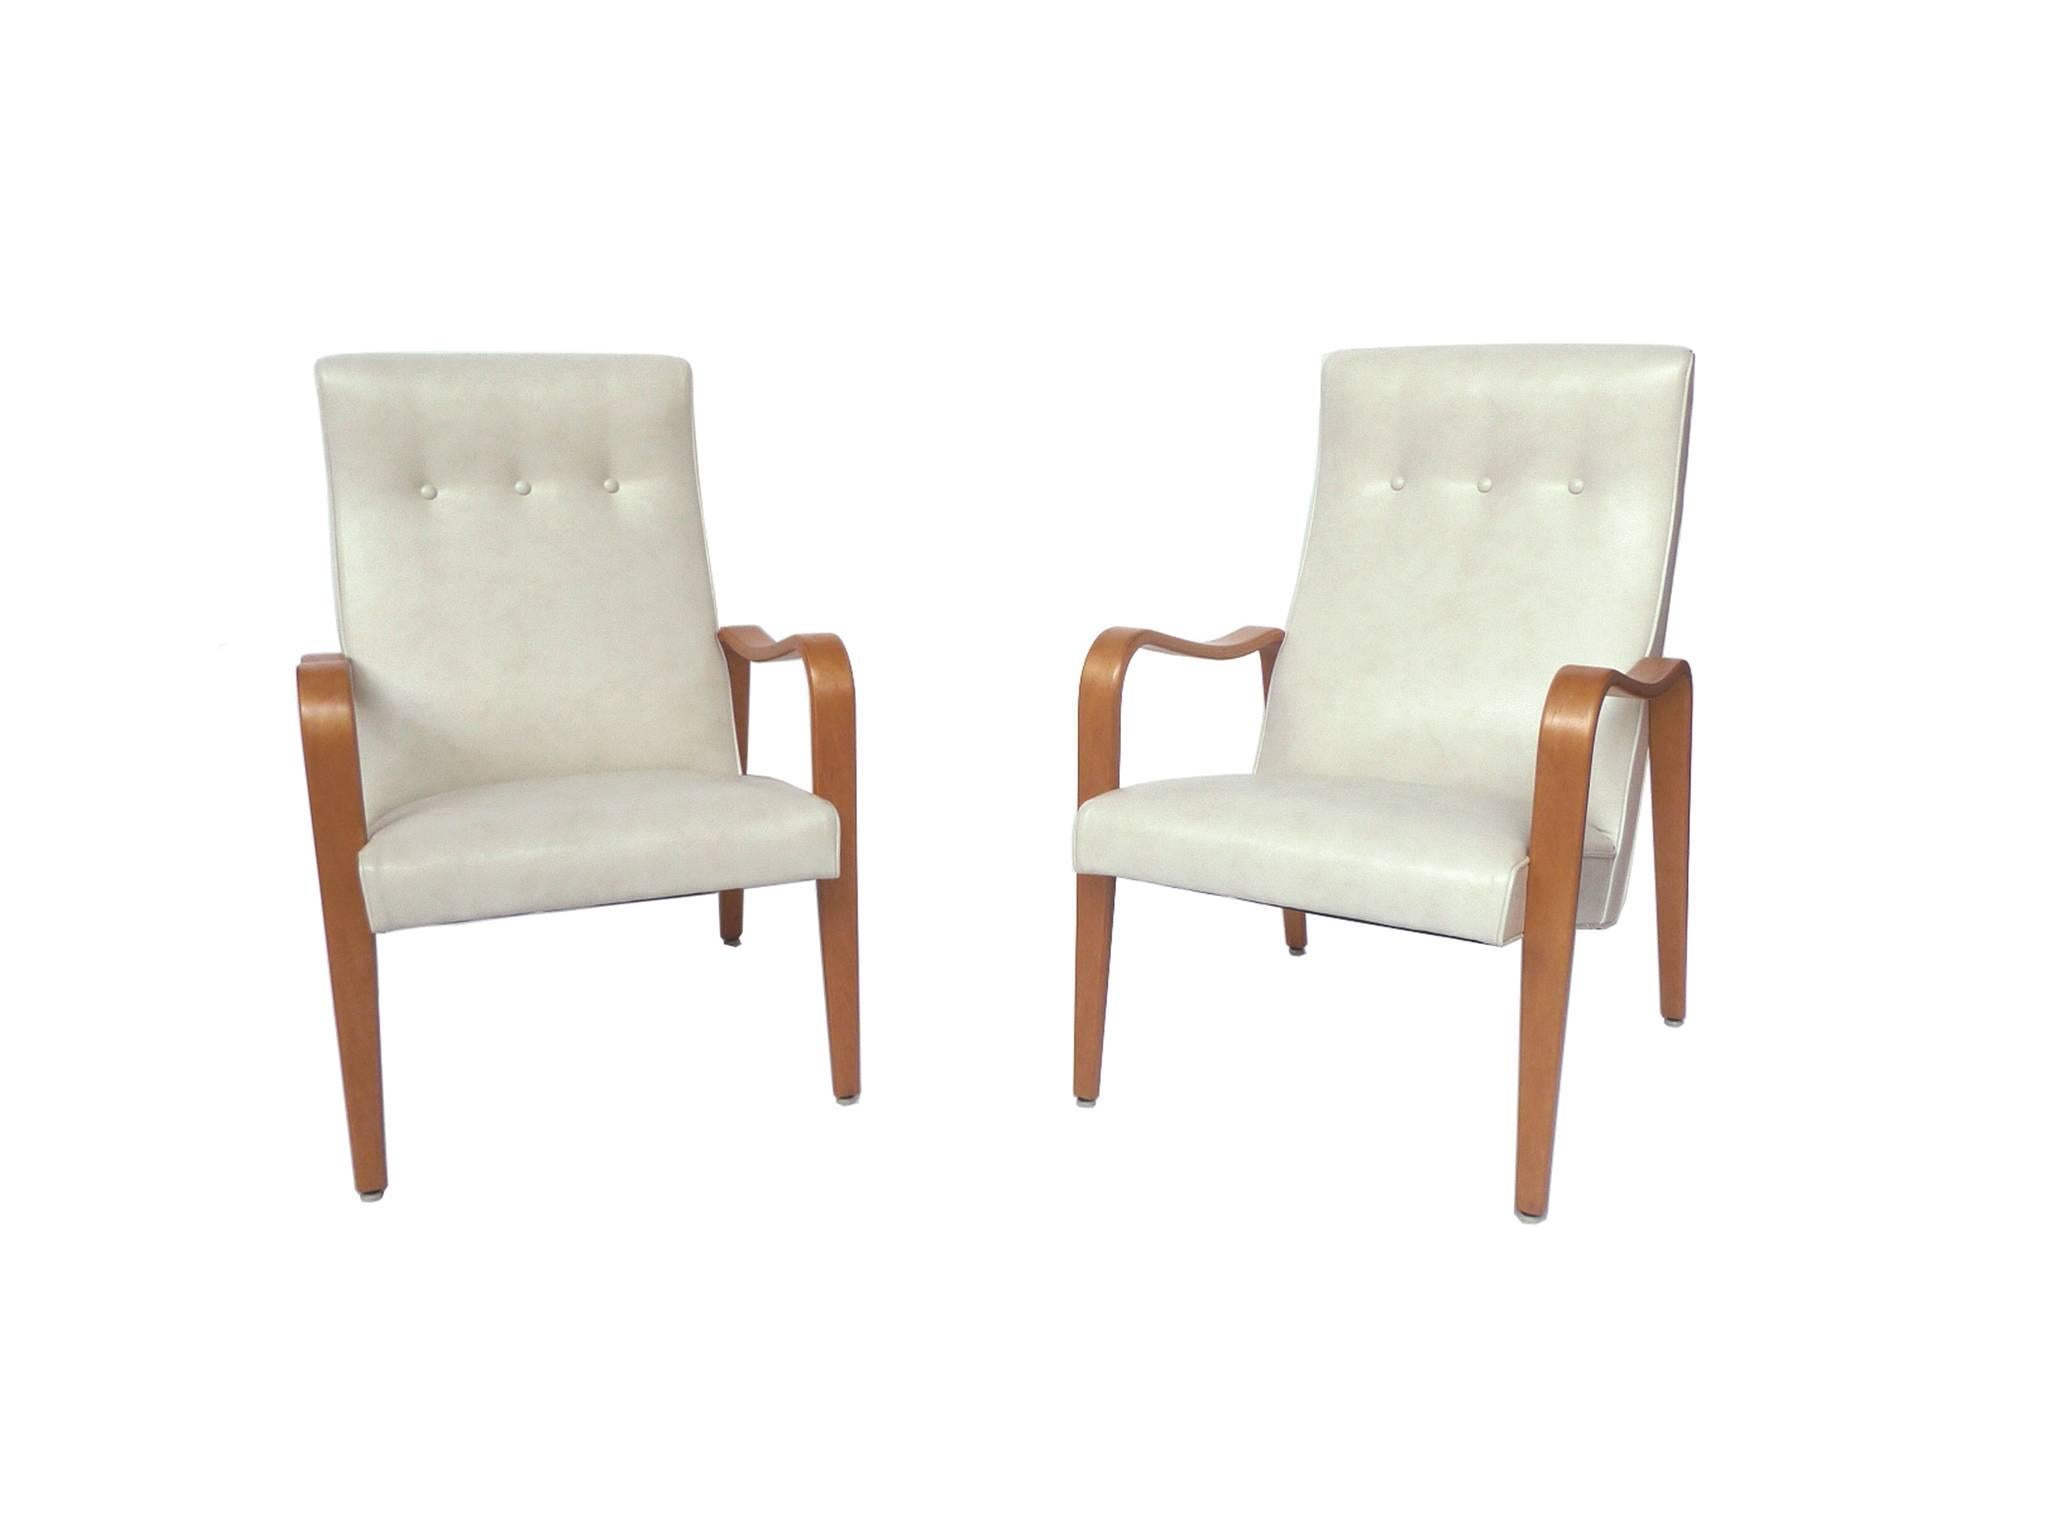 These Thonet lounge chairs are perfect for relaxing. They are very comfortable and beautifully designed, composed of bentwood and new upholstery work. The fabric is a white marine vinyl with piping made from the same material. Thonet was renowned